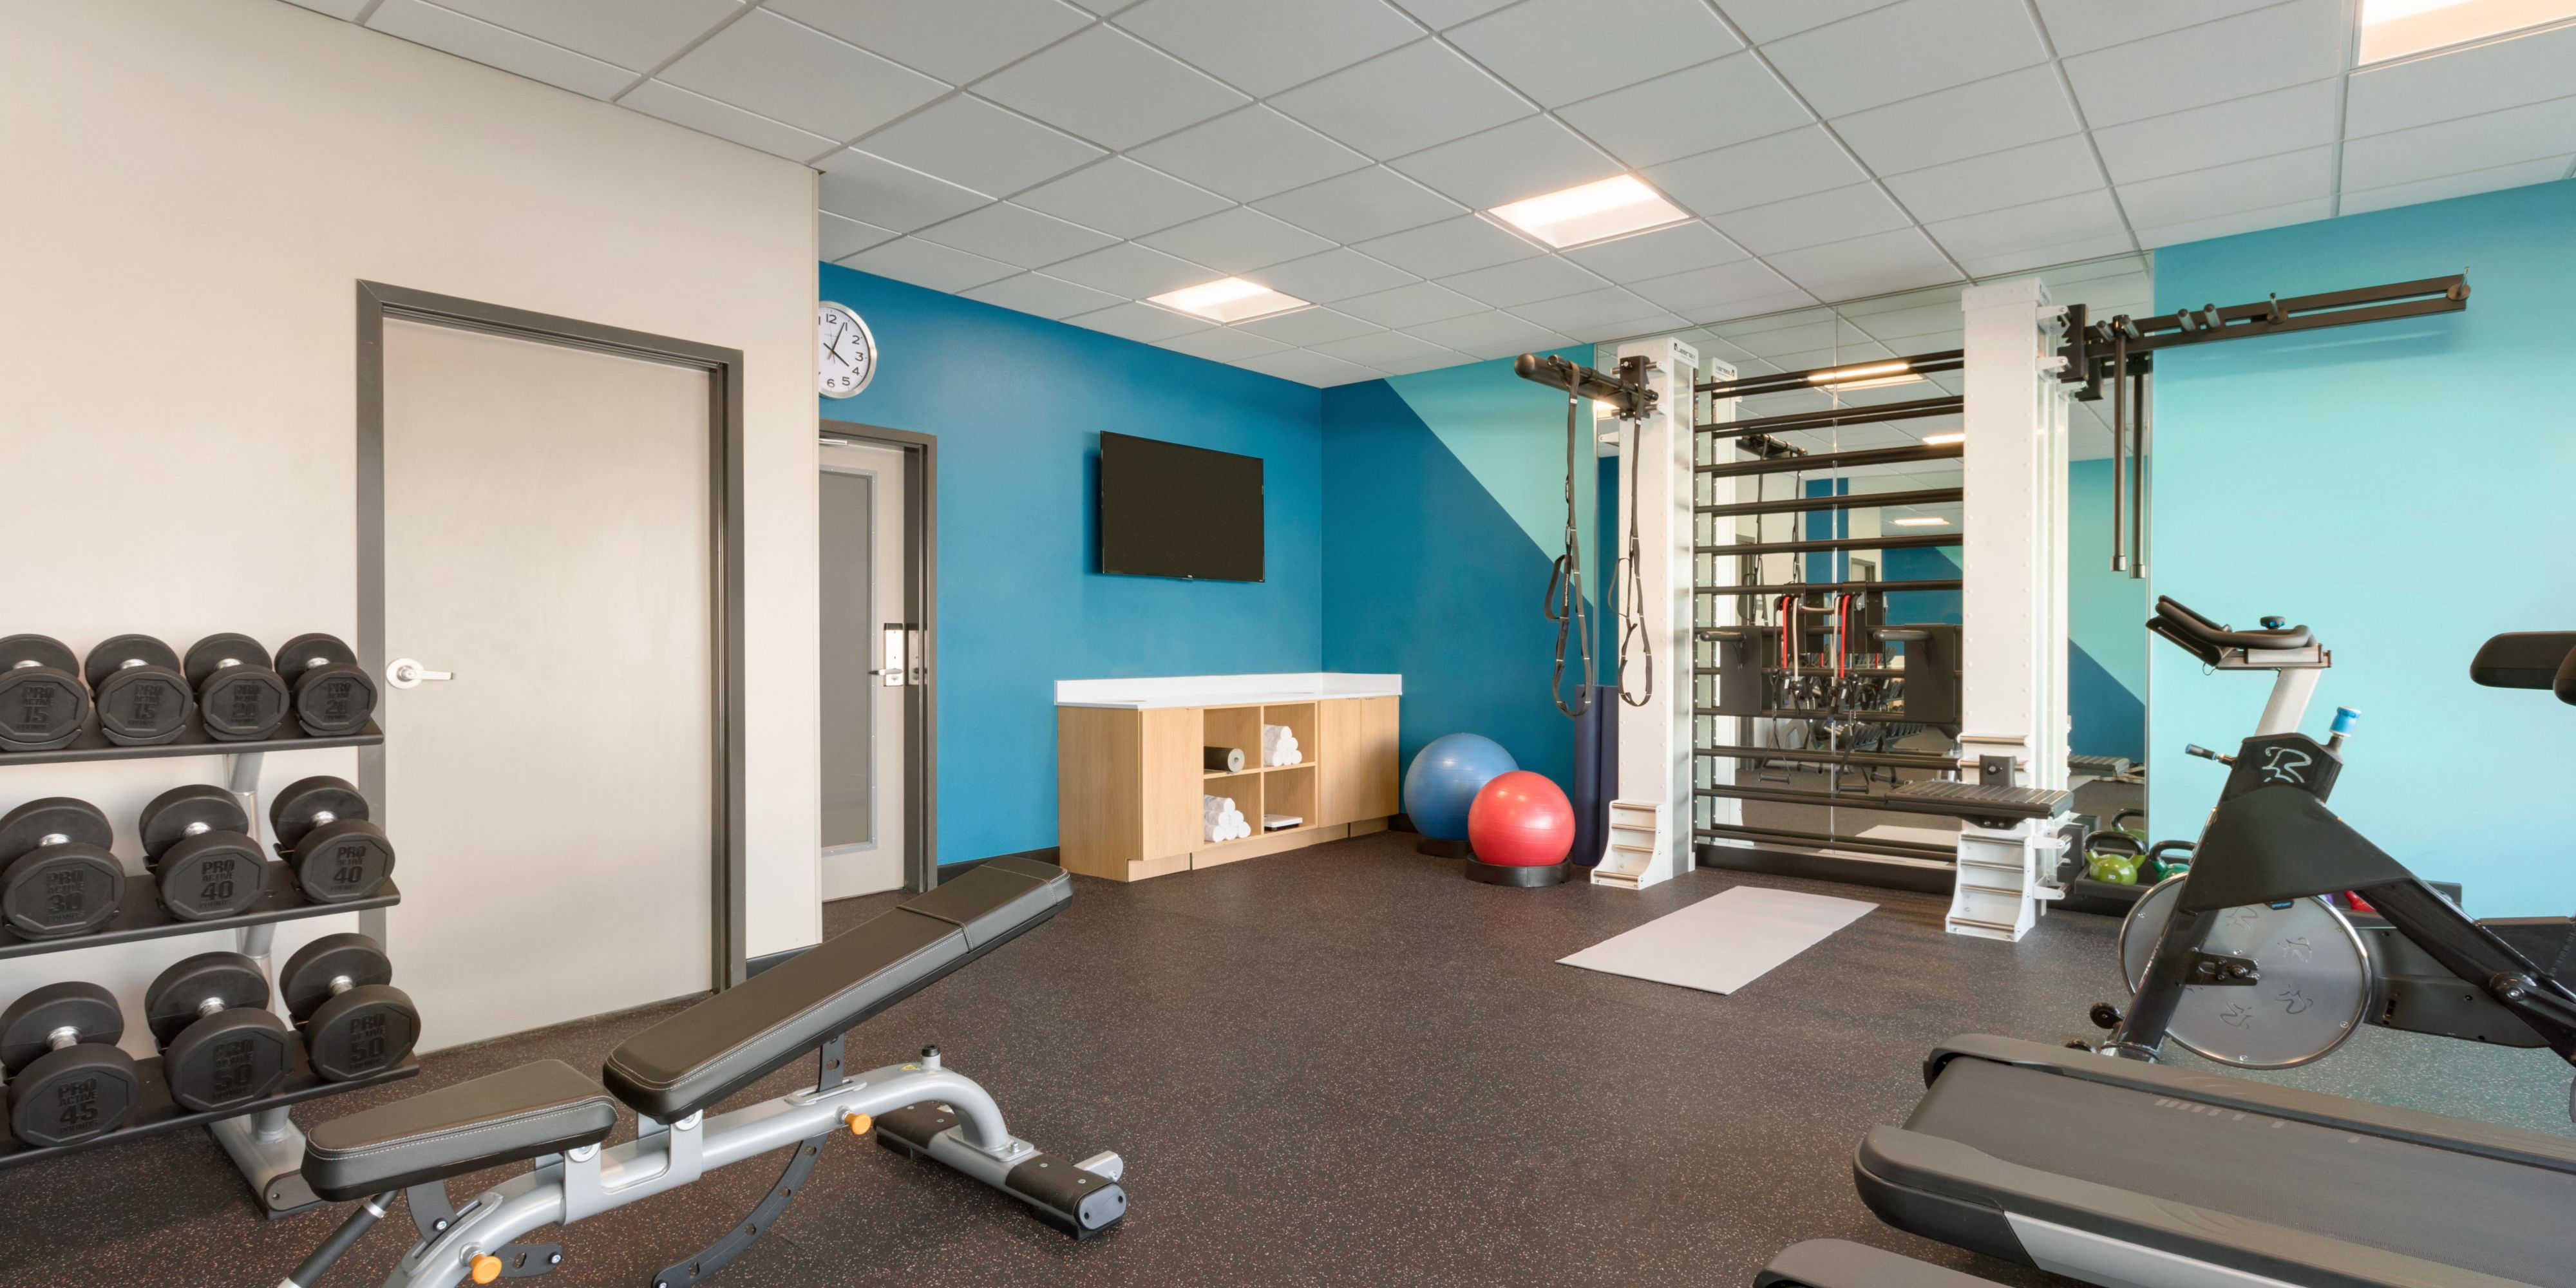 Get your sweat on in our complimentary fitness center - open 24 hours.